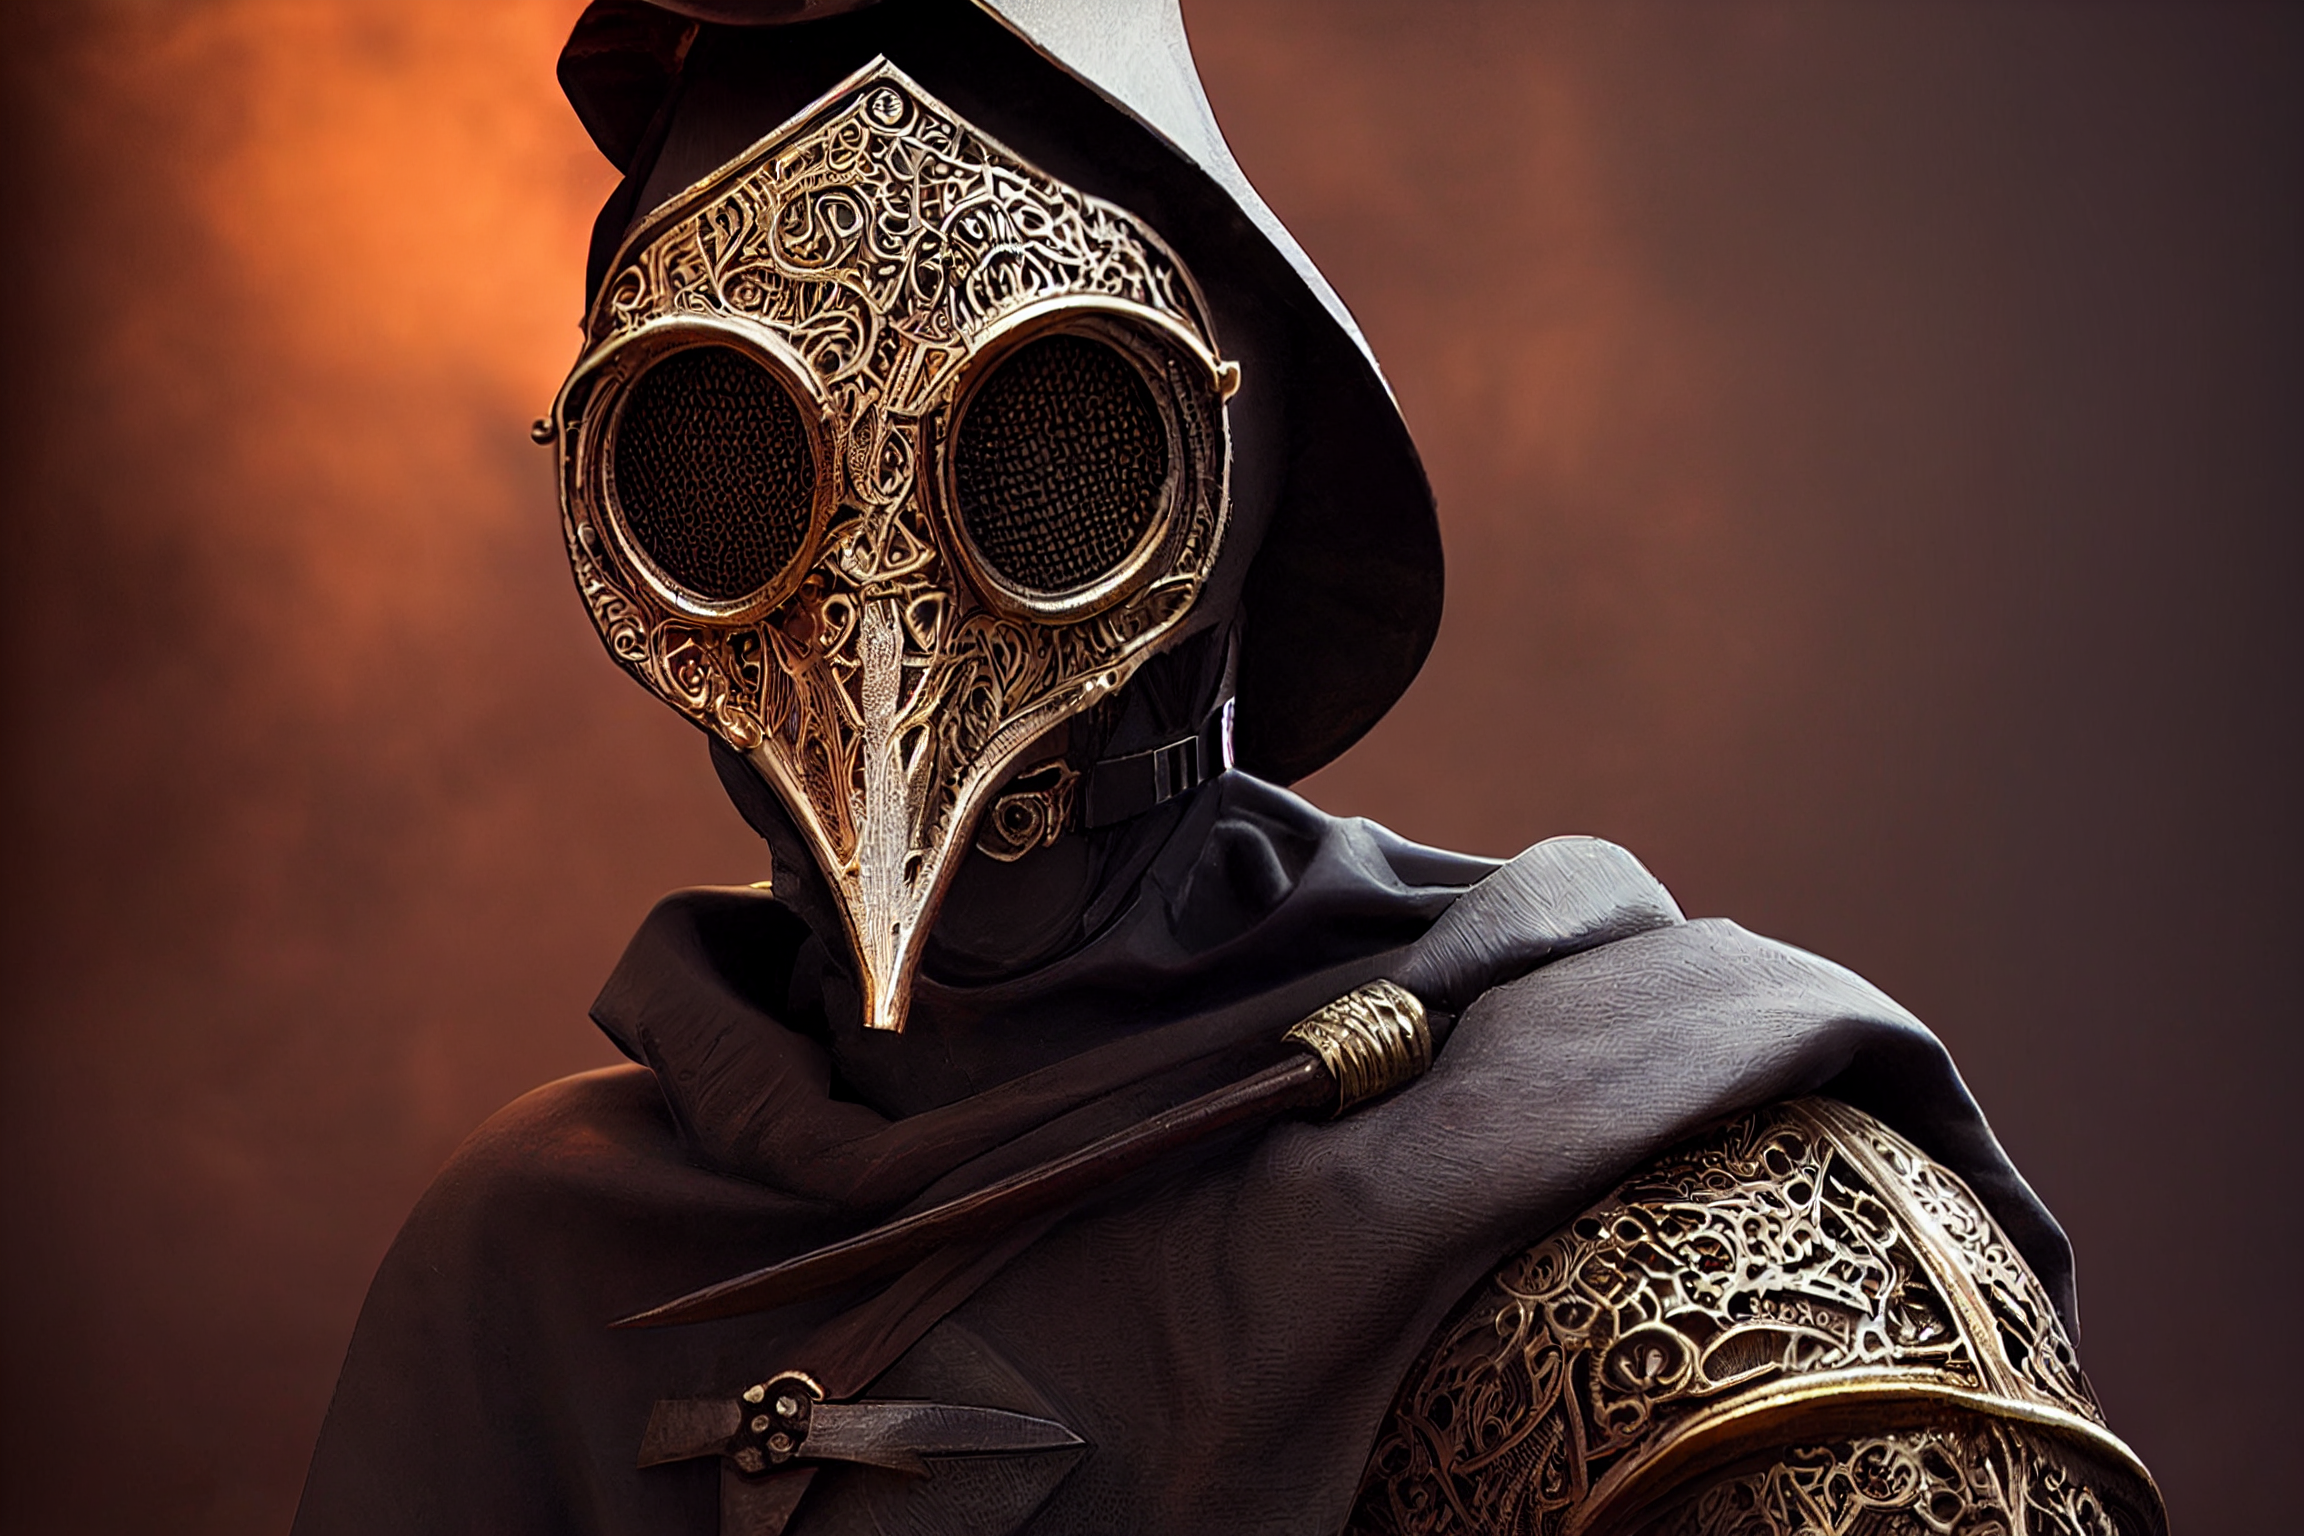 219800 Plague Doctor Stock Photos Pictures  RoyaltyFree Images   iStock  Plague doctor mask Medieval plague doctor Black plague doctor